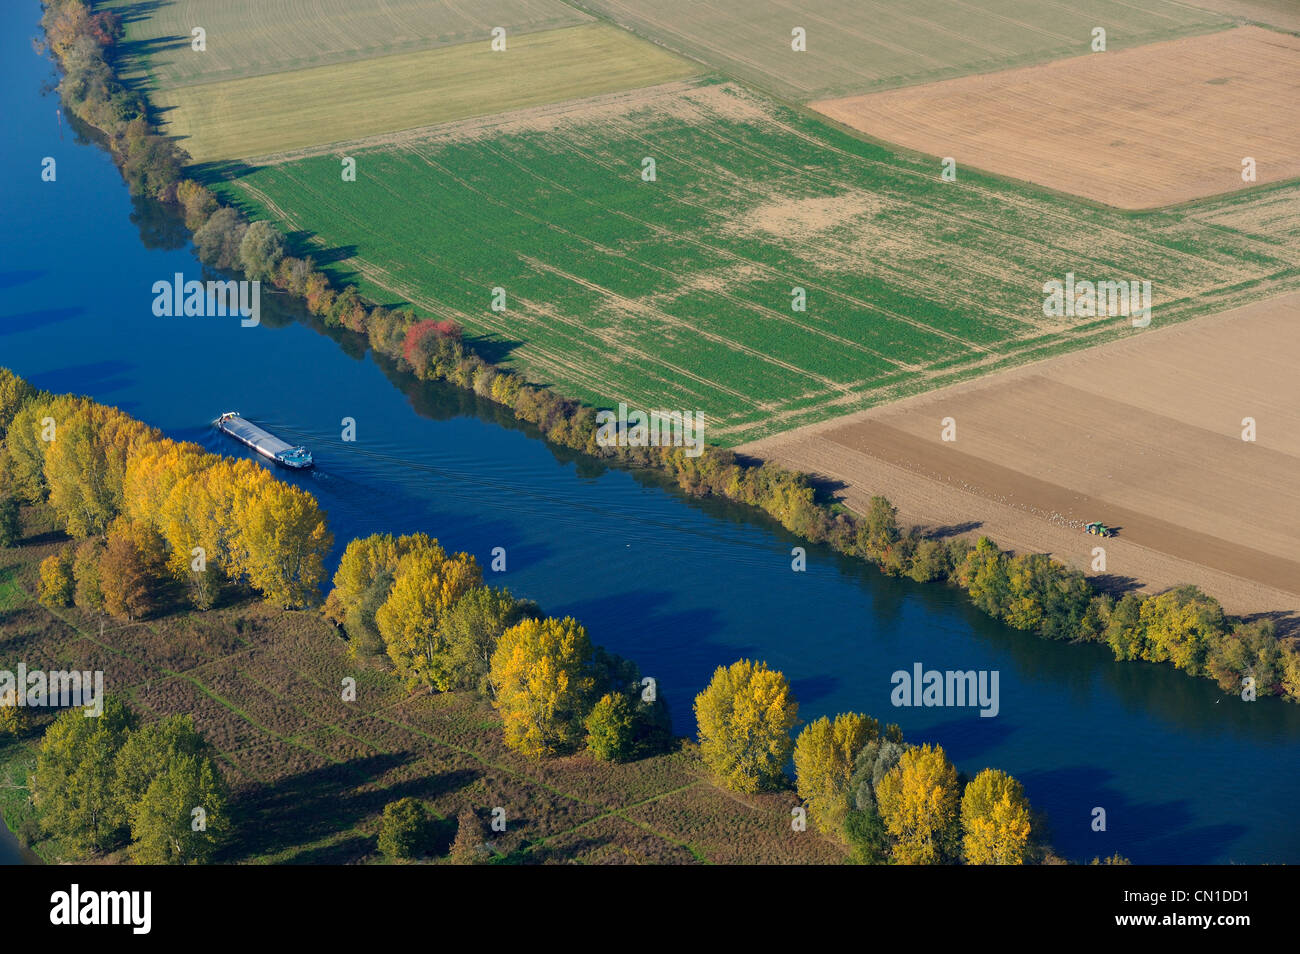 France, Eure, barge on the Seine river around Heudebouville, Lormais island (aerial view) Stock Photo